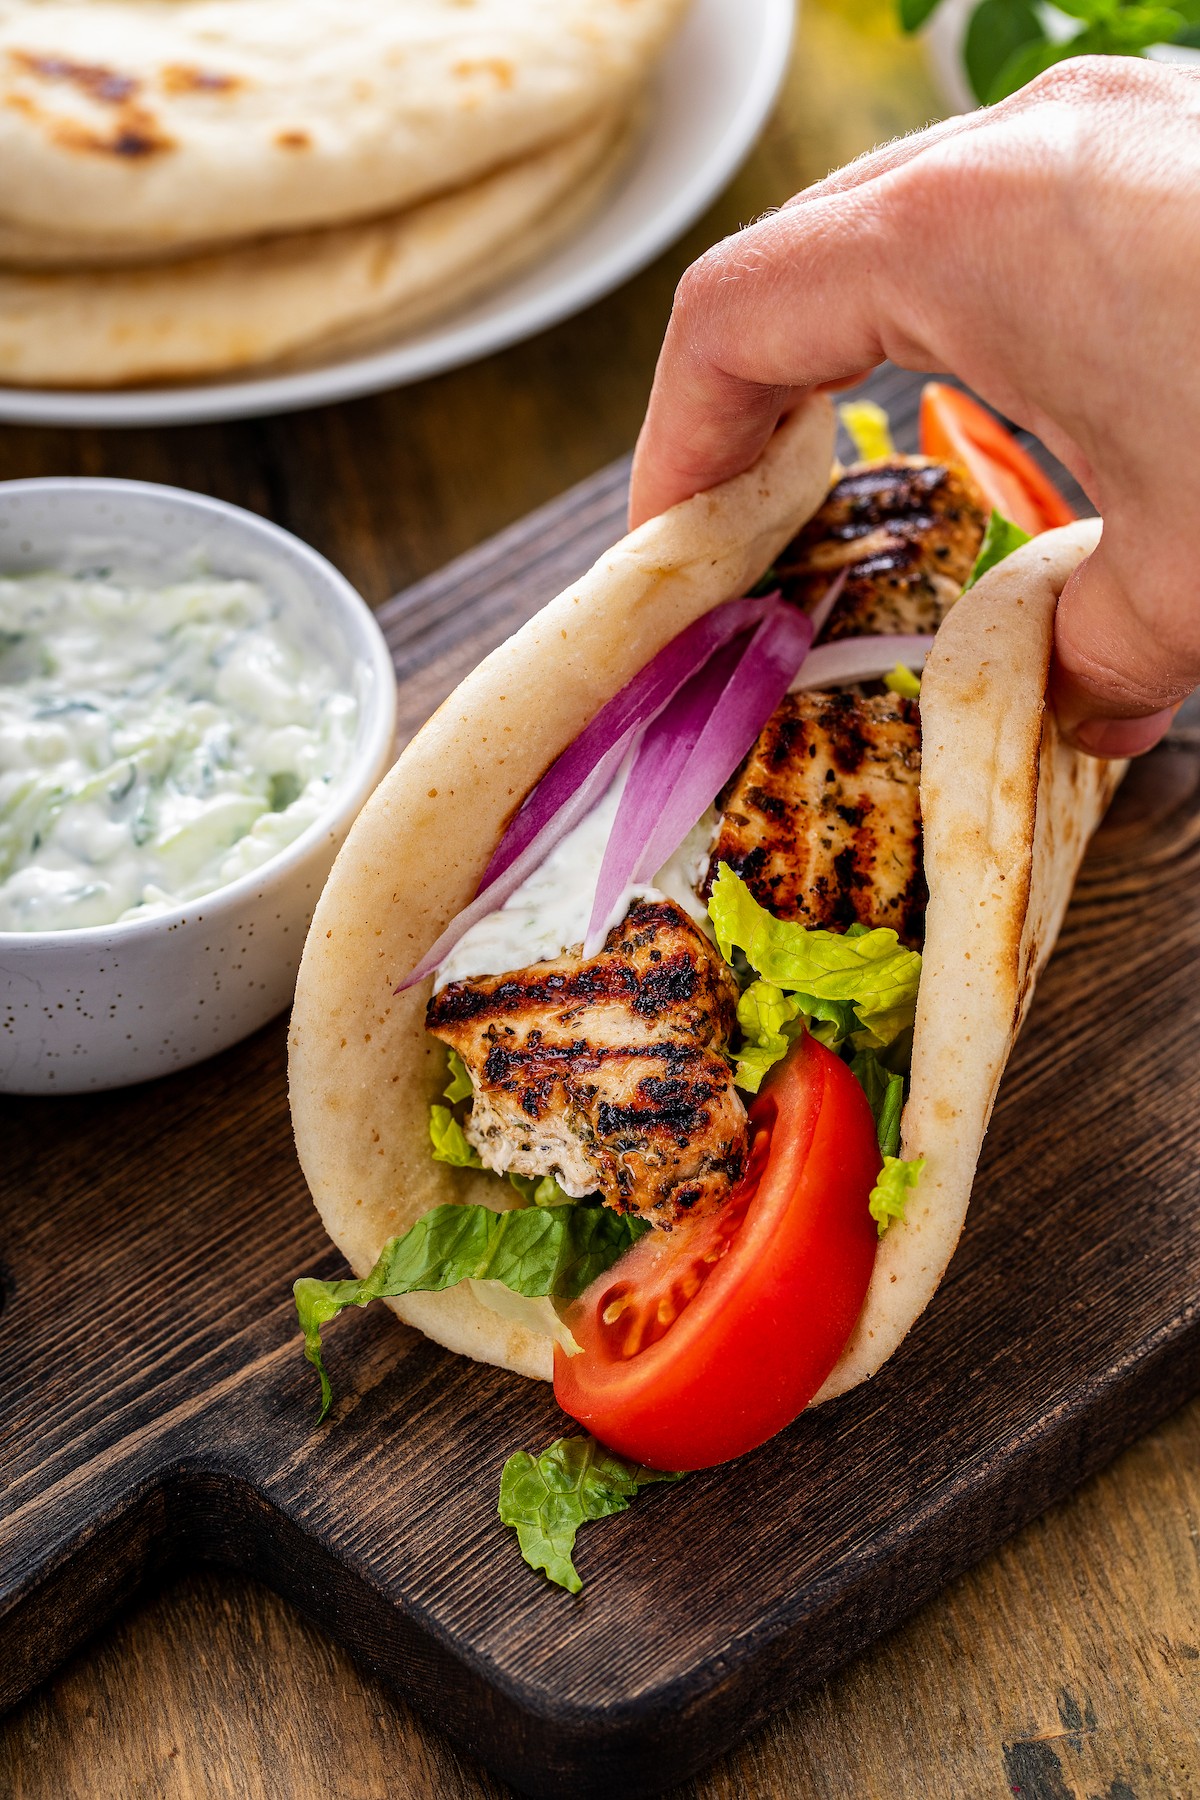 Grilled chicken, red onion, and tomato wrapped in pita bread.